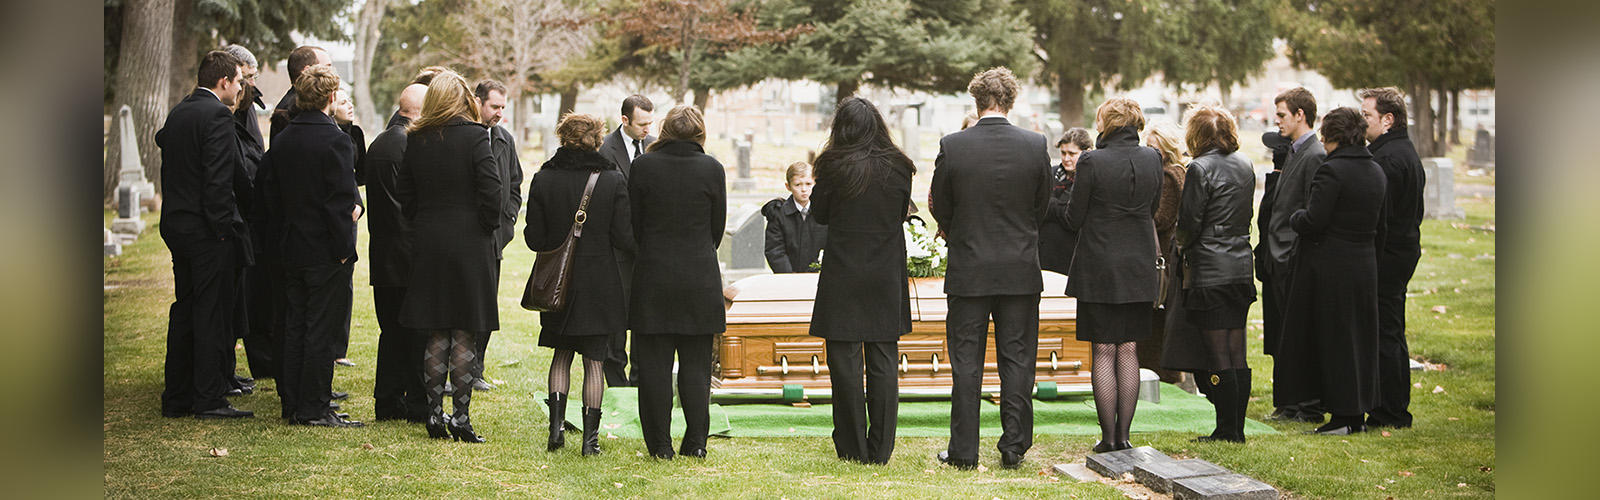 Humanist Funeral